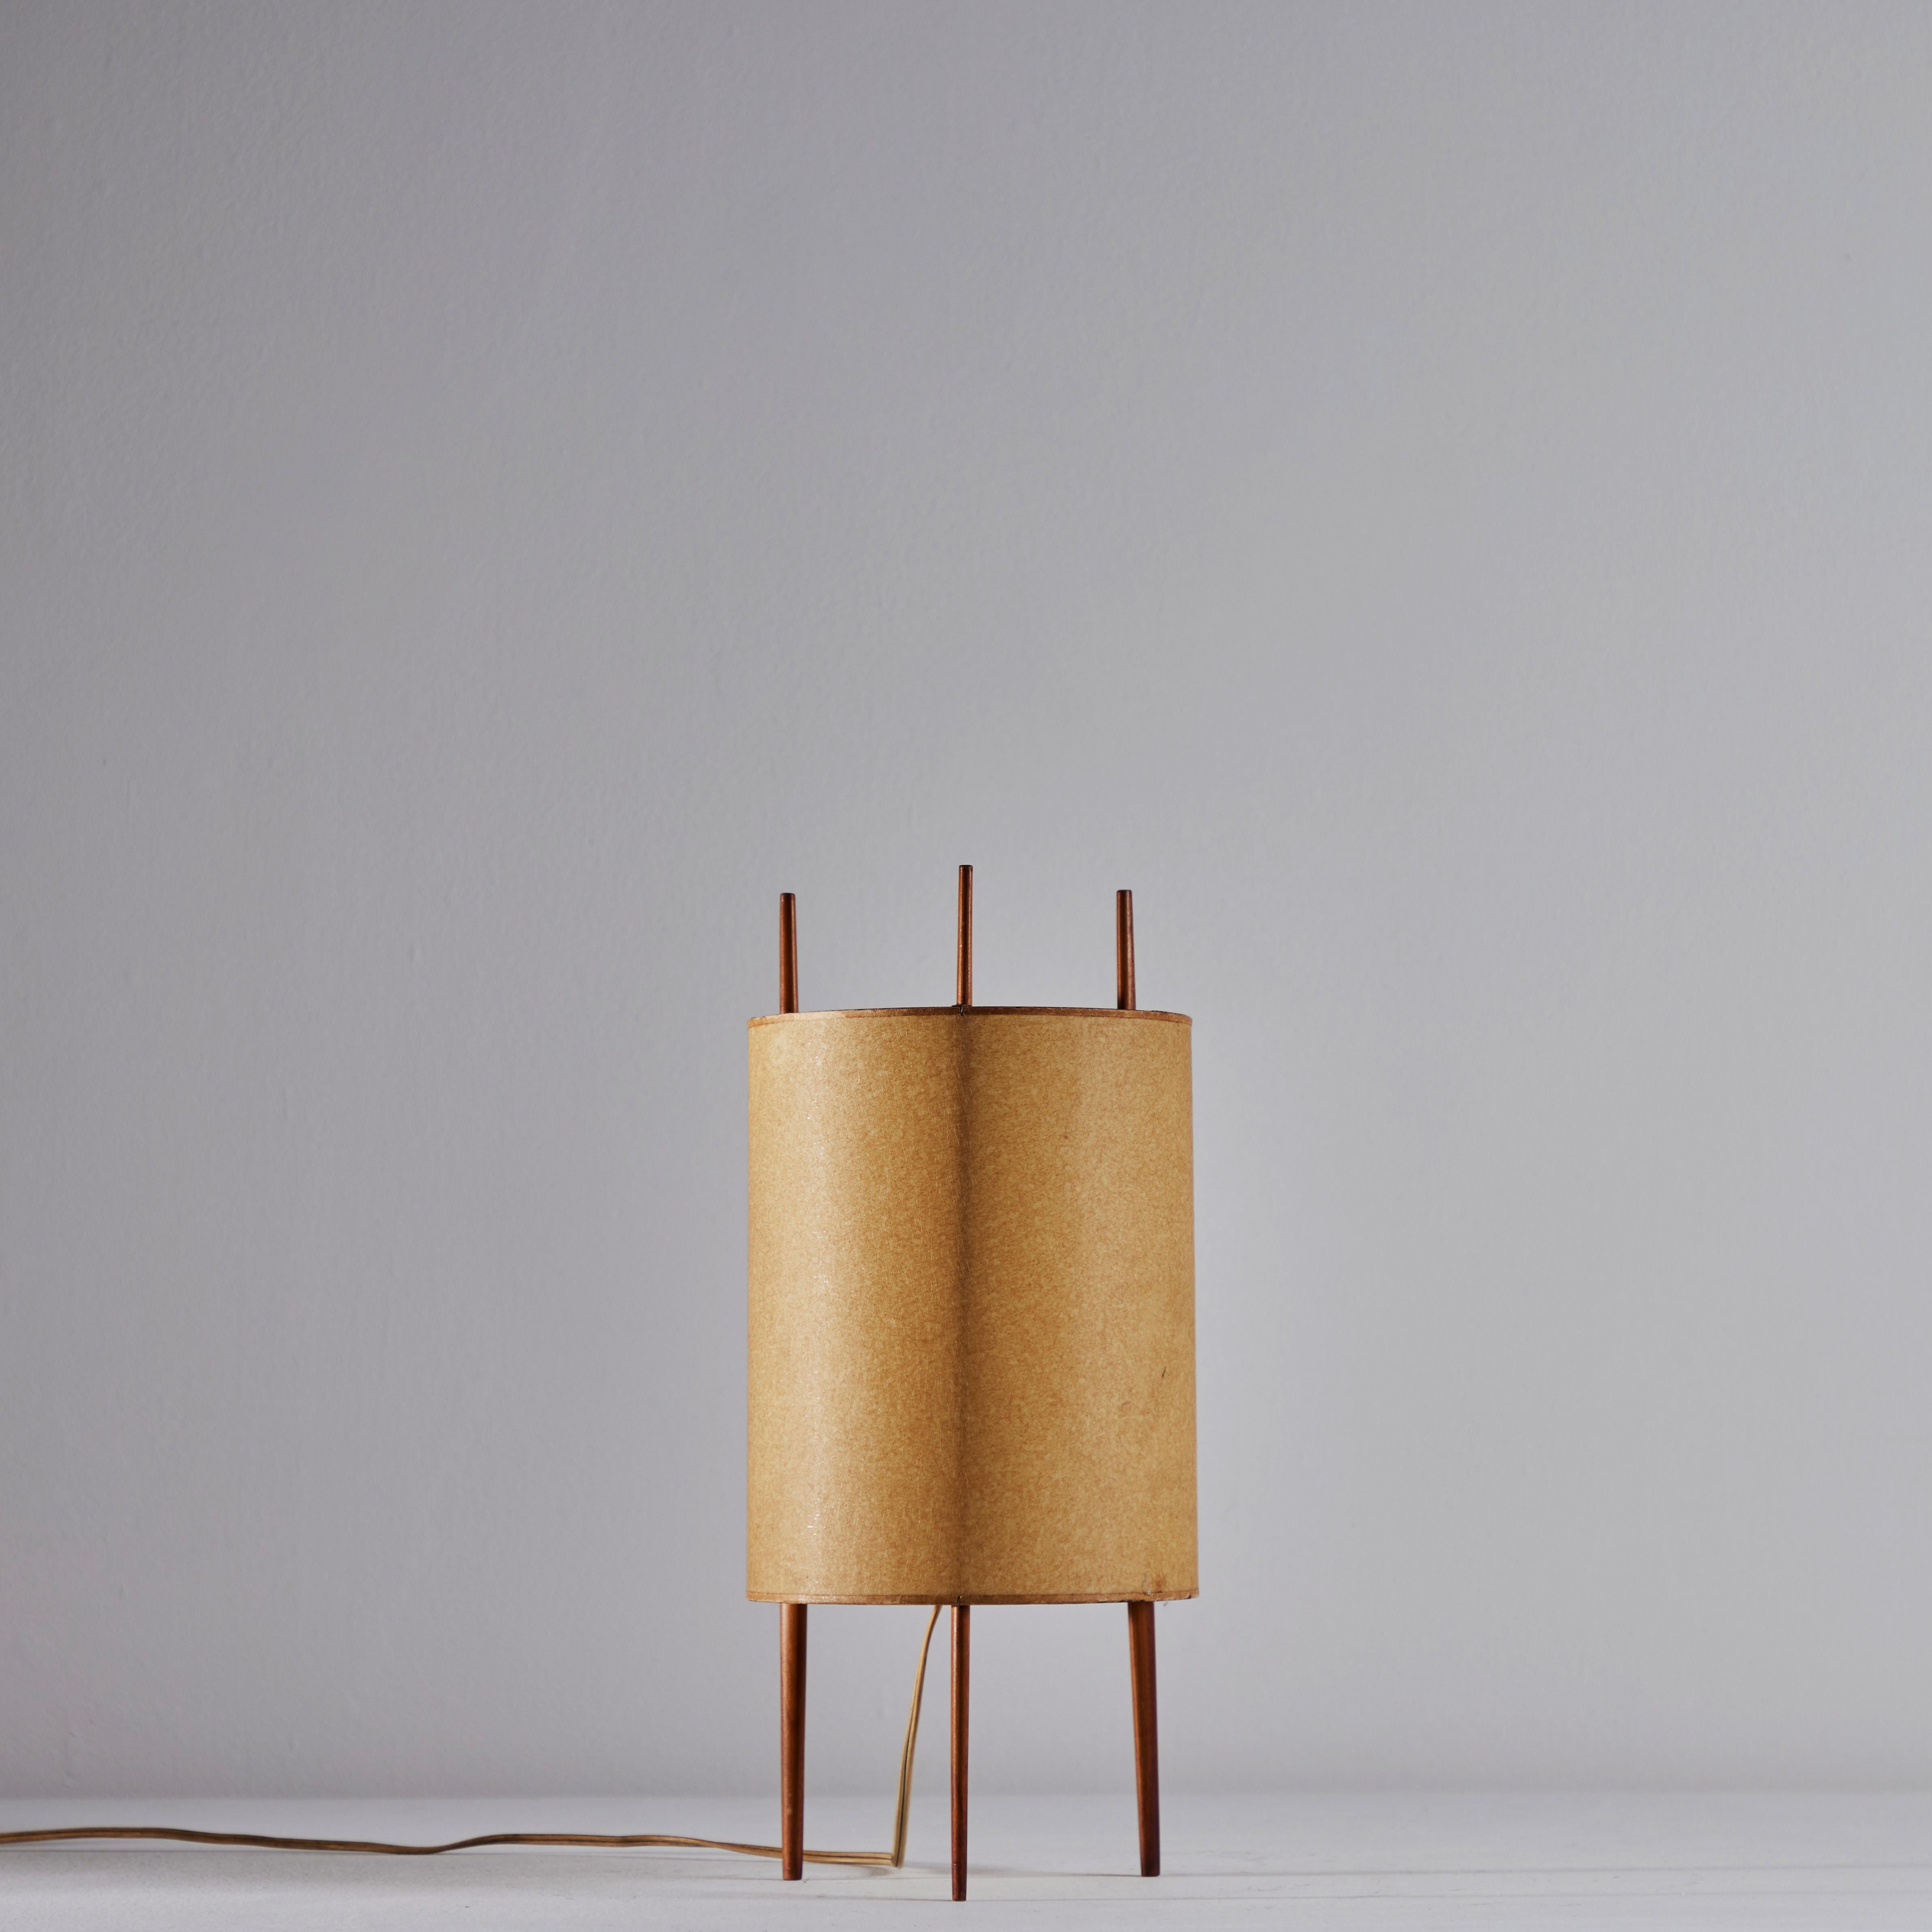 Cherry Original Table Lamp by Isamu Noguchi for Knoll 